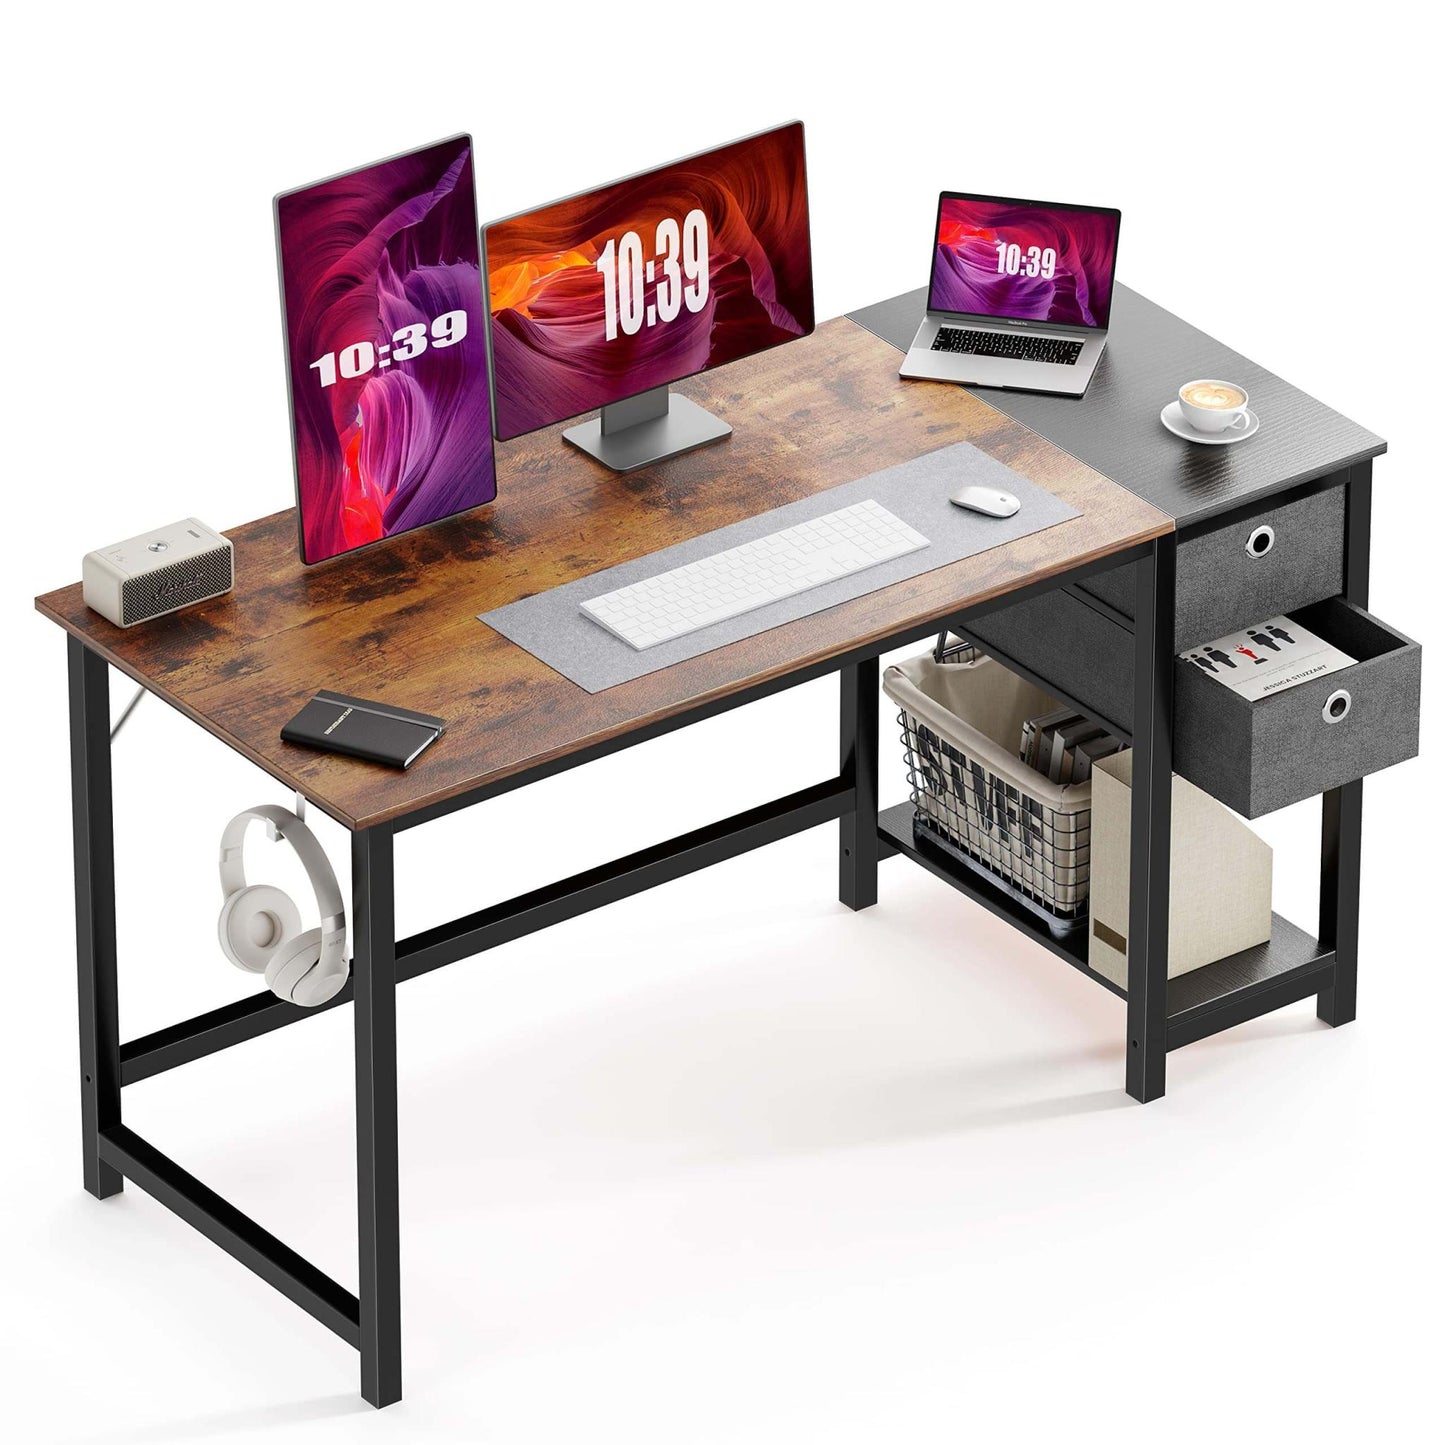 Compact Office Desk with Drawers for Work or Study